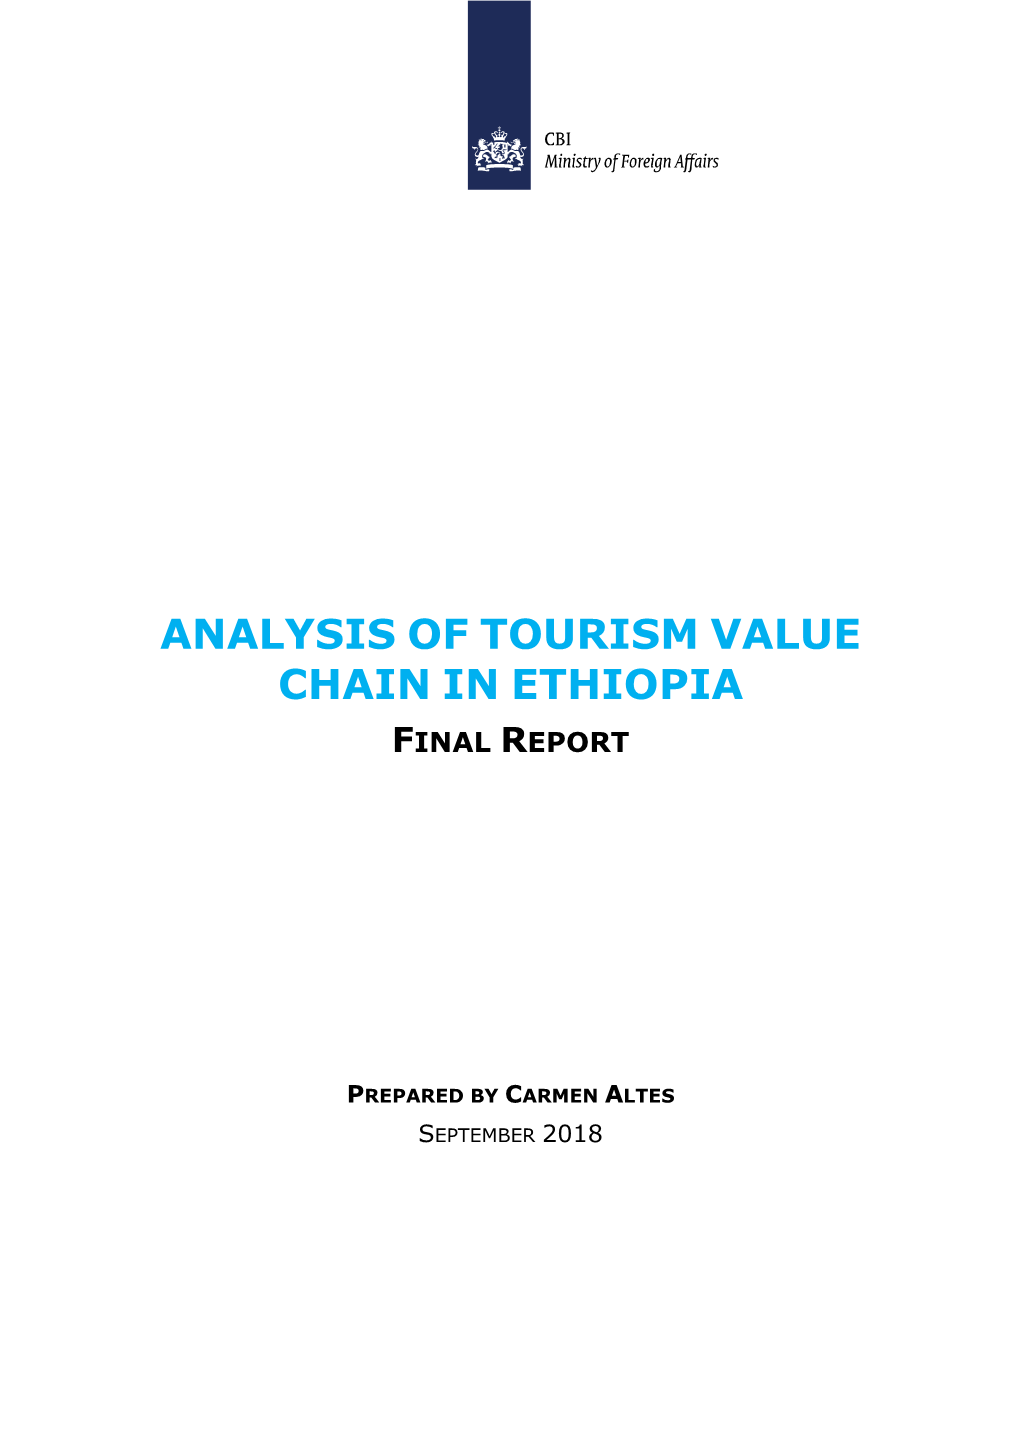 Analysis of Tourism Value Chain in Ethiopia Final Report